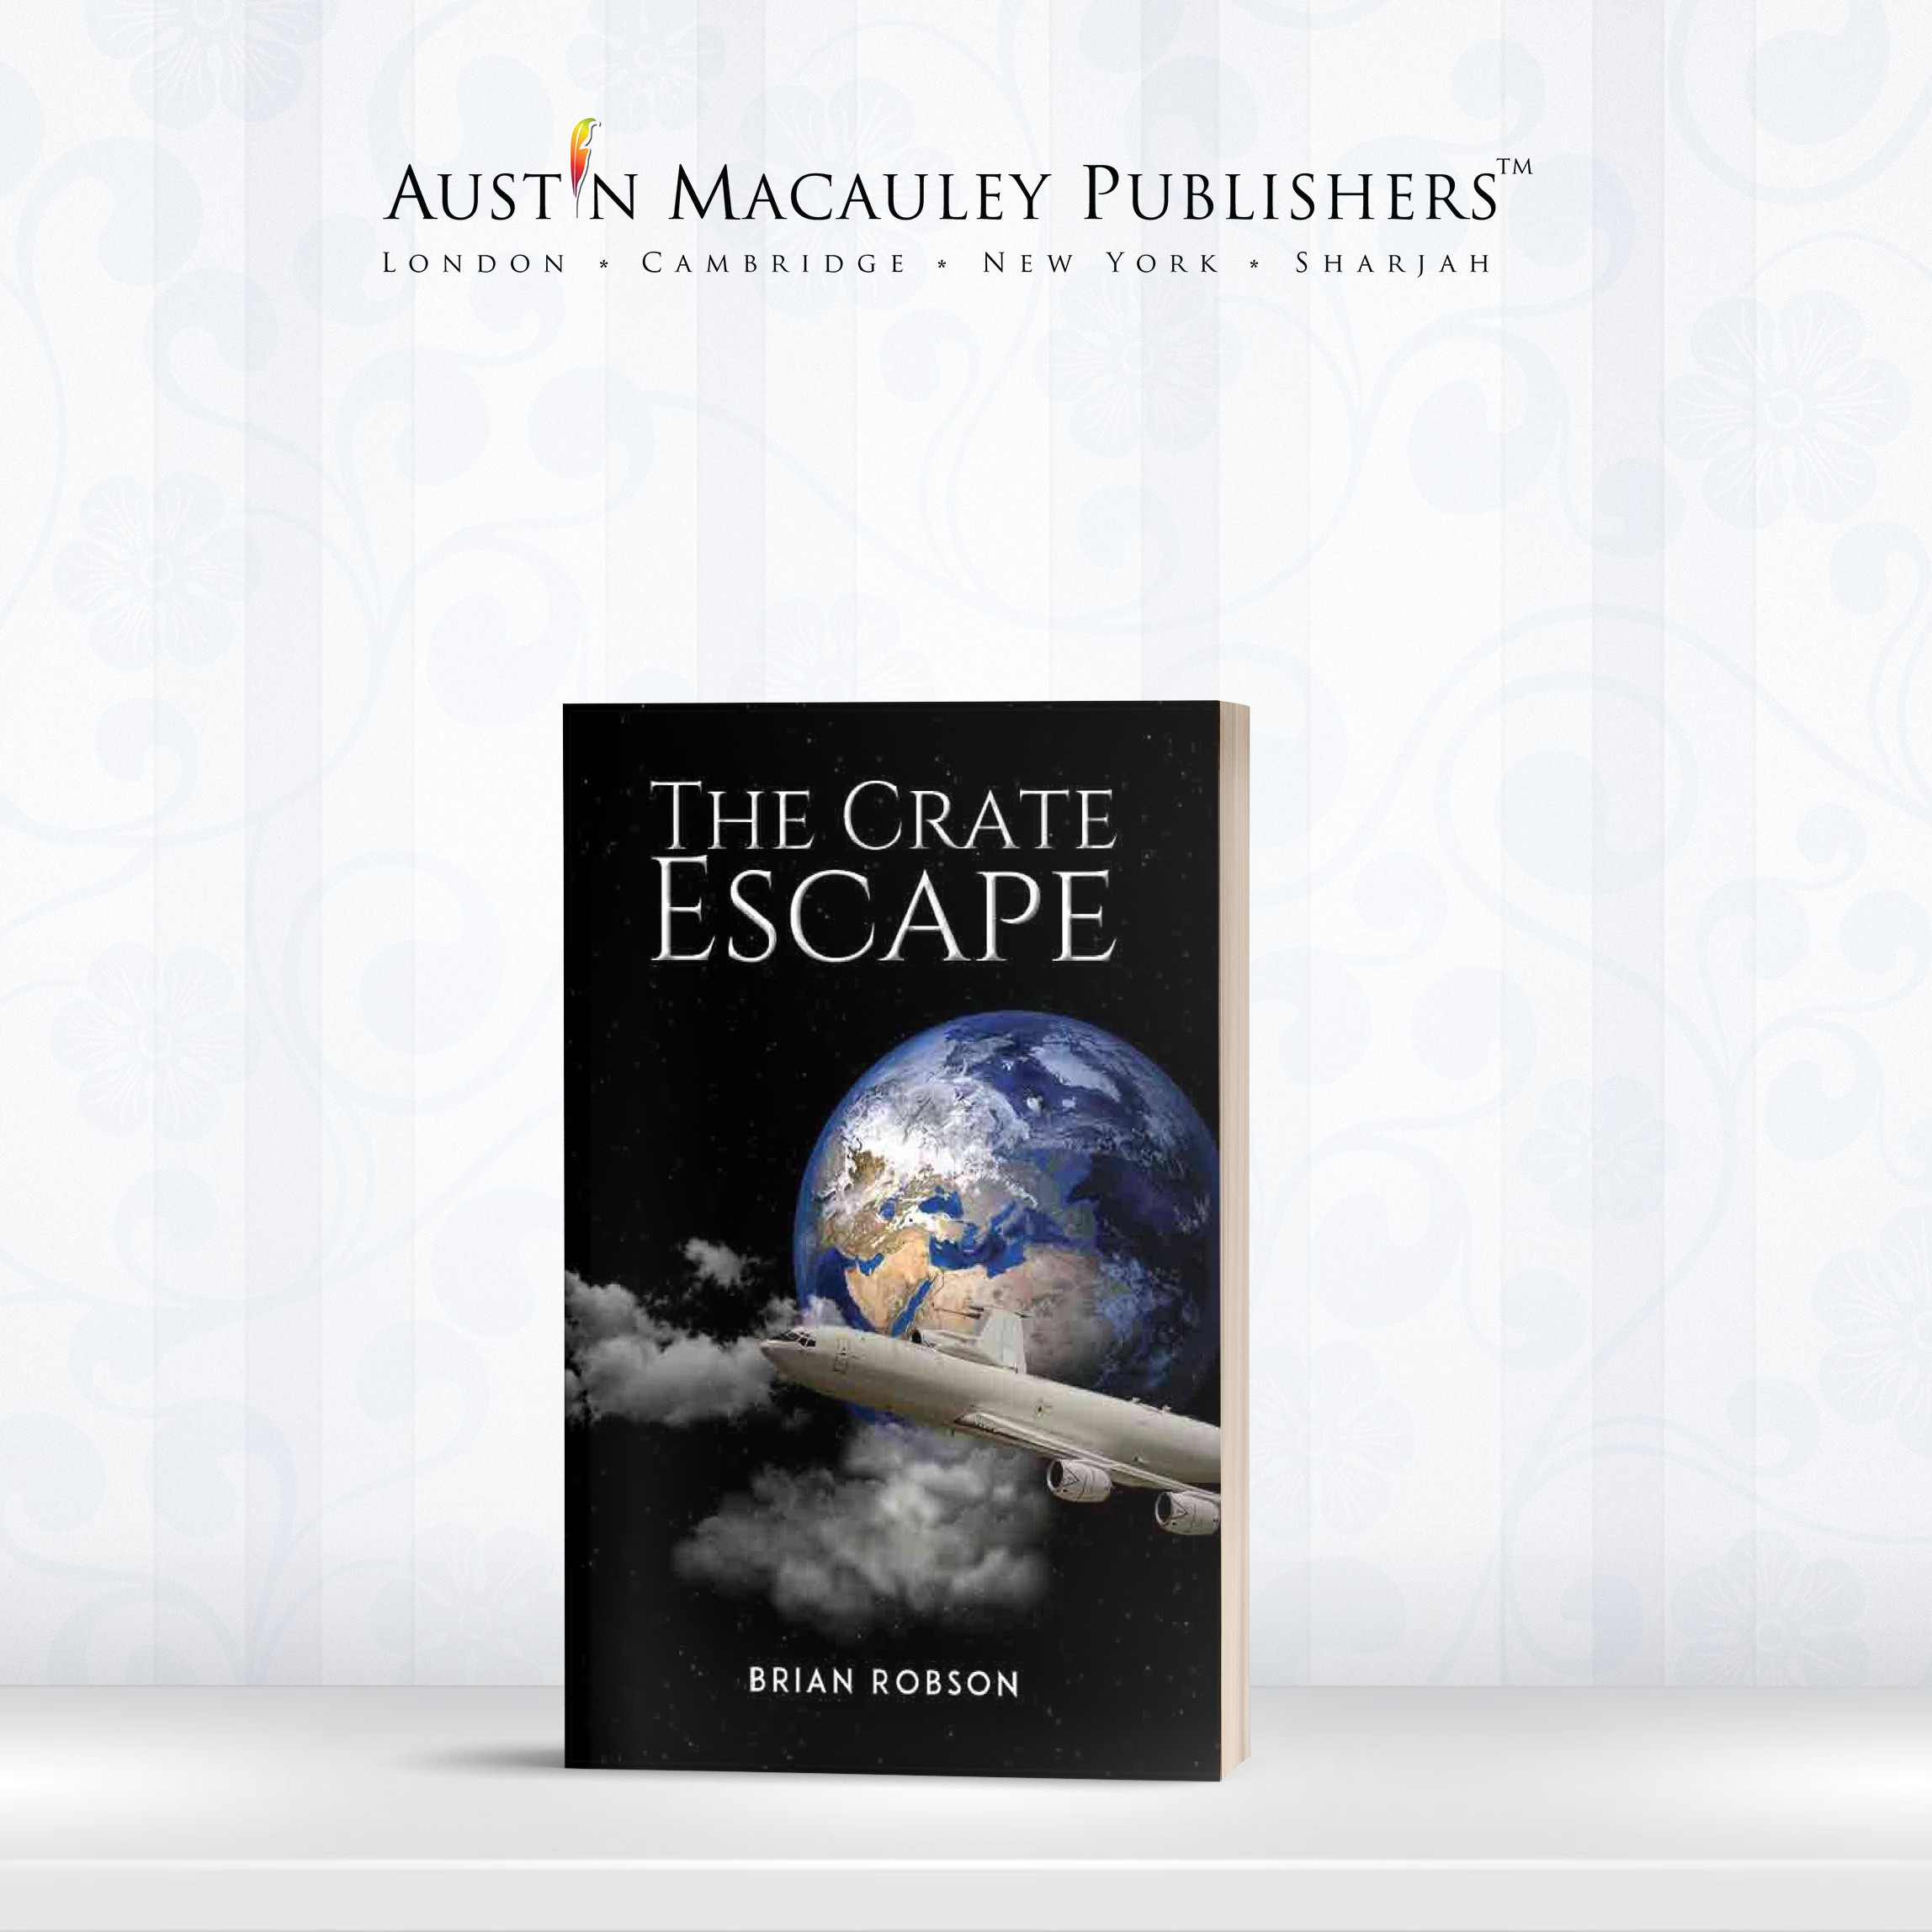 Austin Macauley’s Incredible Author Brian Robson Joined Dave Fanning’s Radio Show